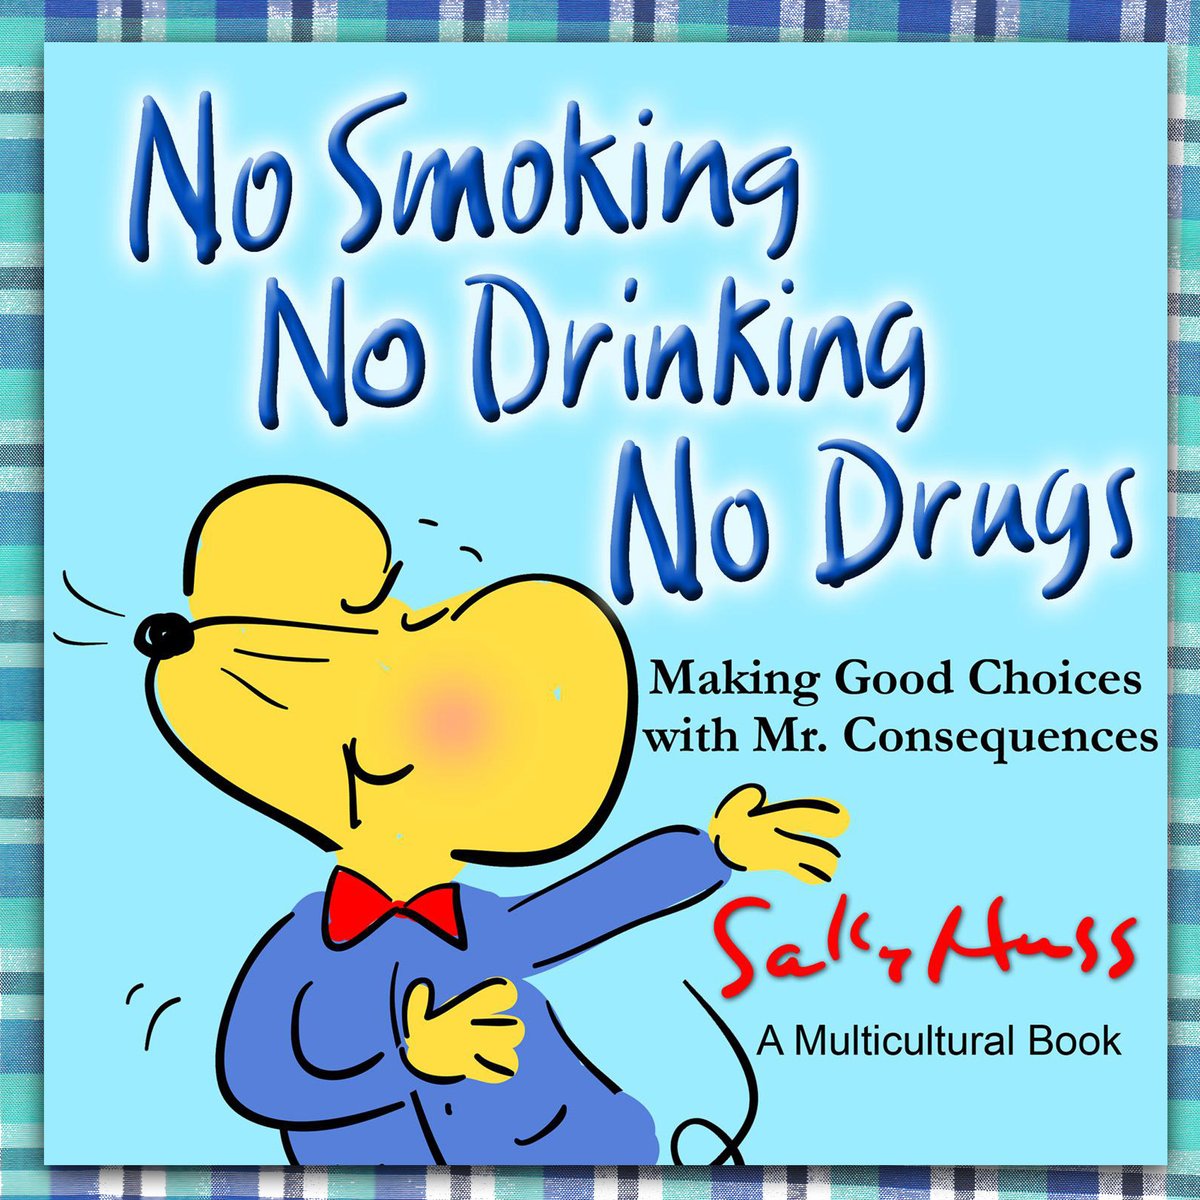 *Best Children’s books with TRADITIONAL VALUES
sallyhuss.com/kids-books.html

#childrensbooks #moms #momlife #kidslit #kindergarten #grandmothers #preschool #familyvalues #compassion #bullying #parenting #youngmothers #foodallergies #childrenspoetry #earlylearning